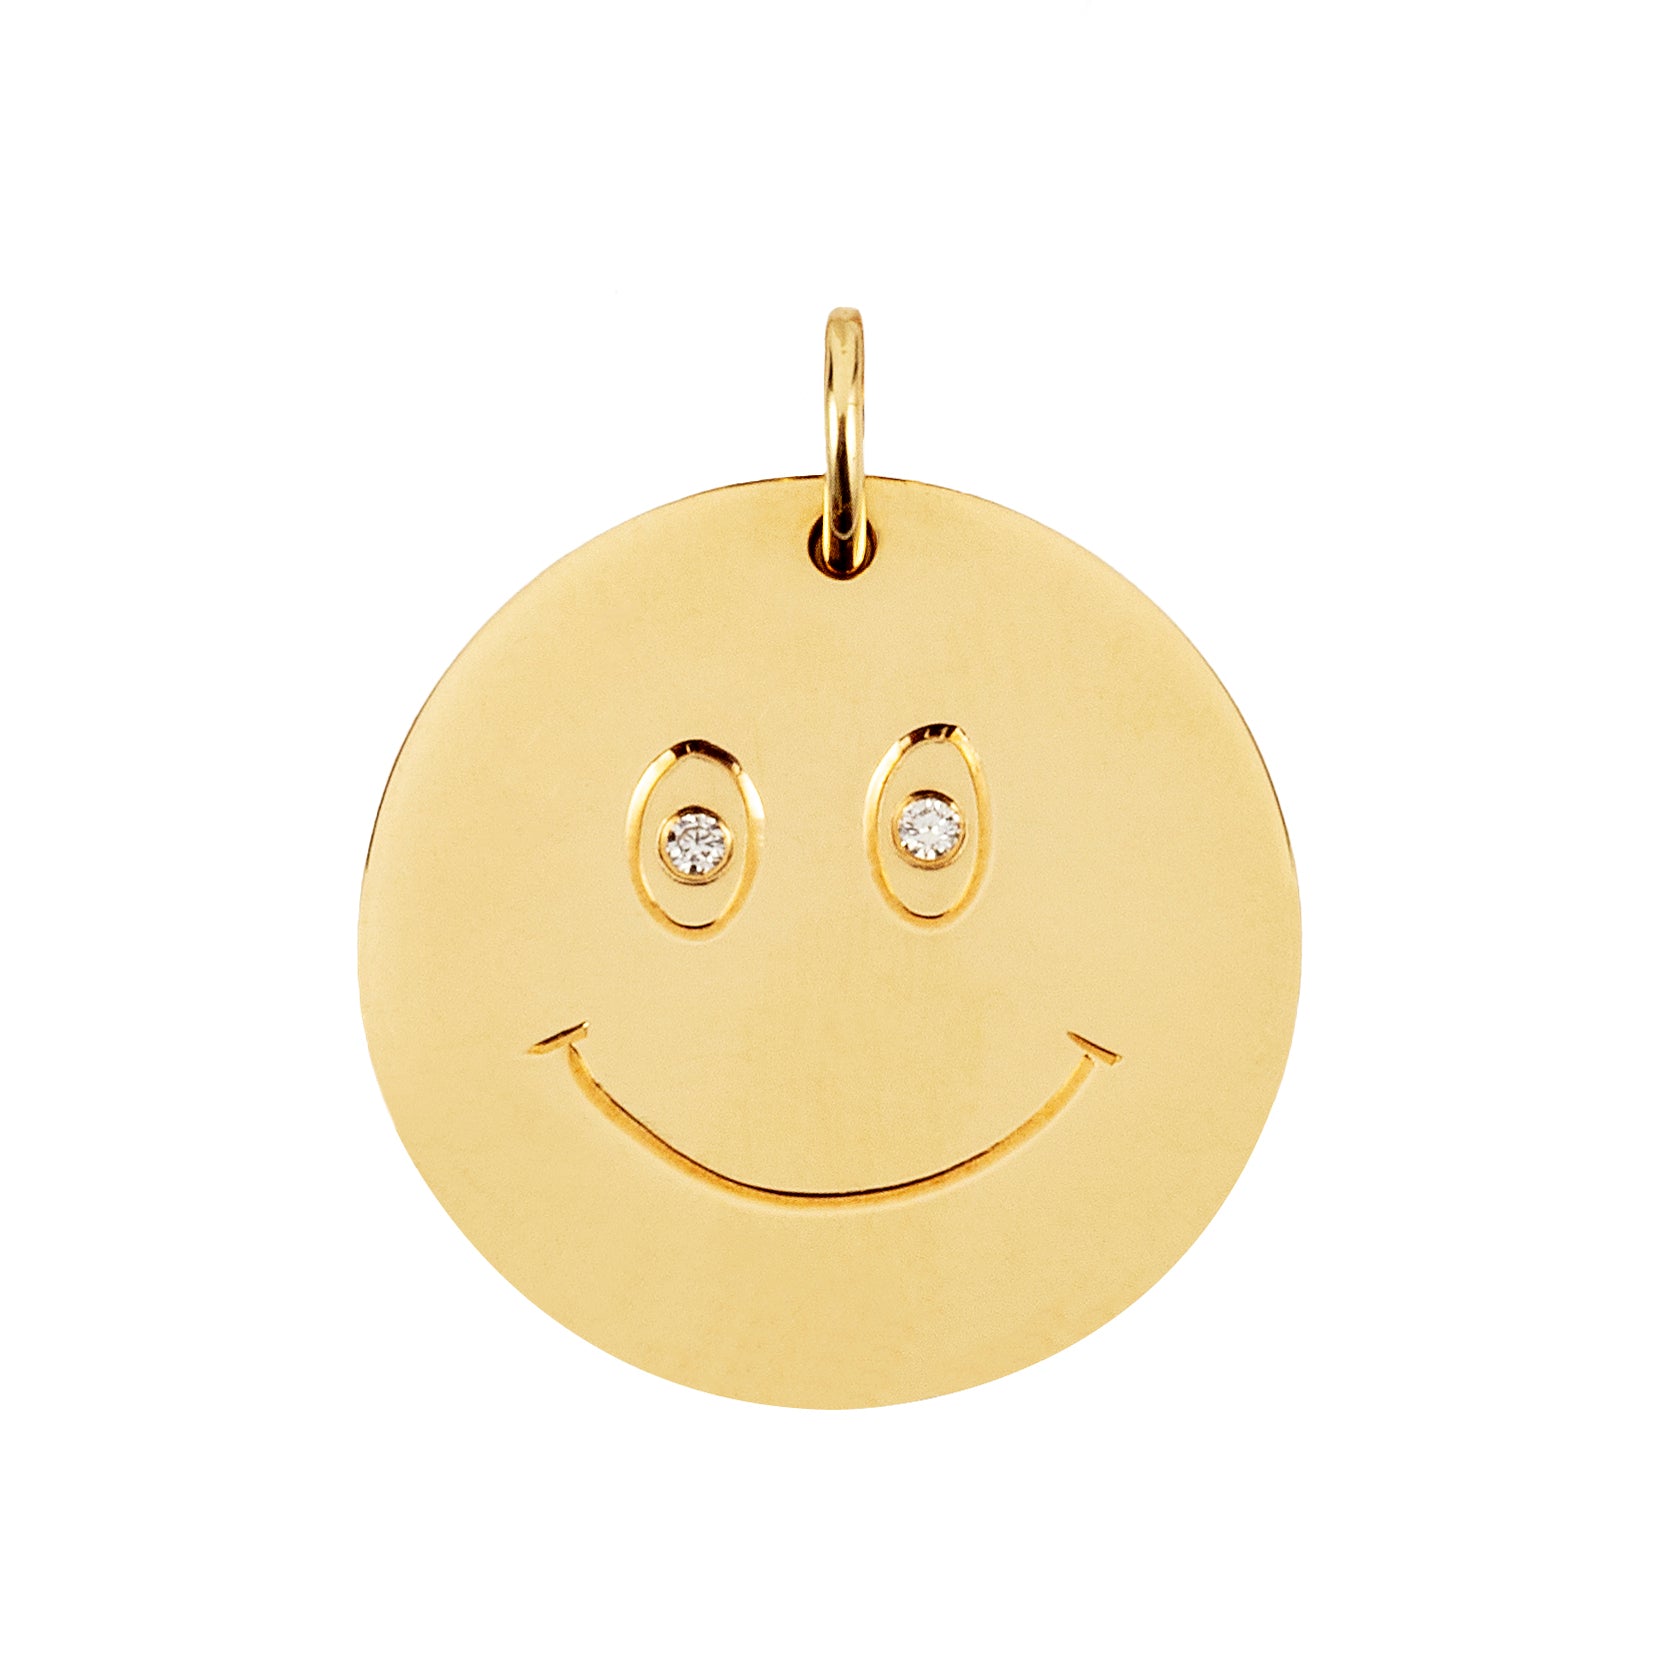 9ct Yellow Gold Disc Pendant with Engraved Smiley and Diamond Eyes